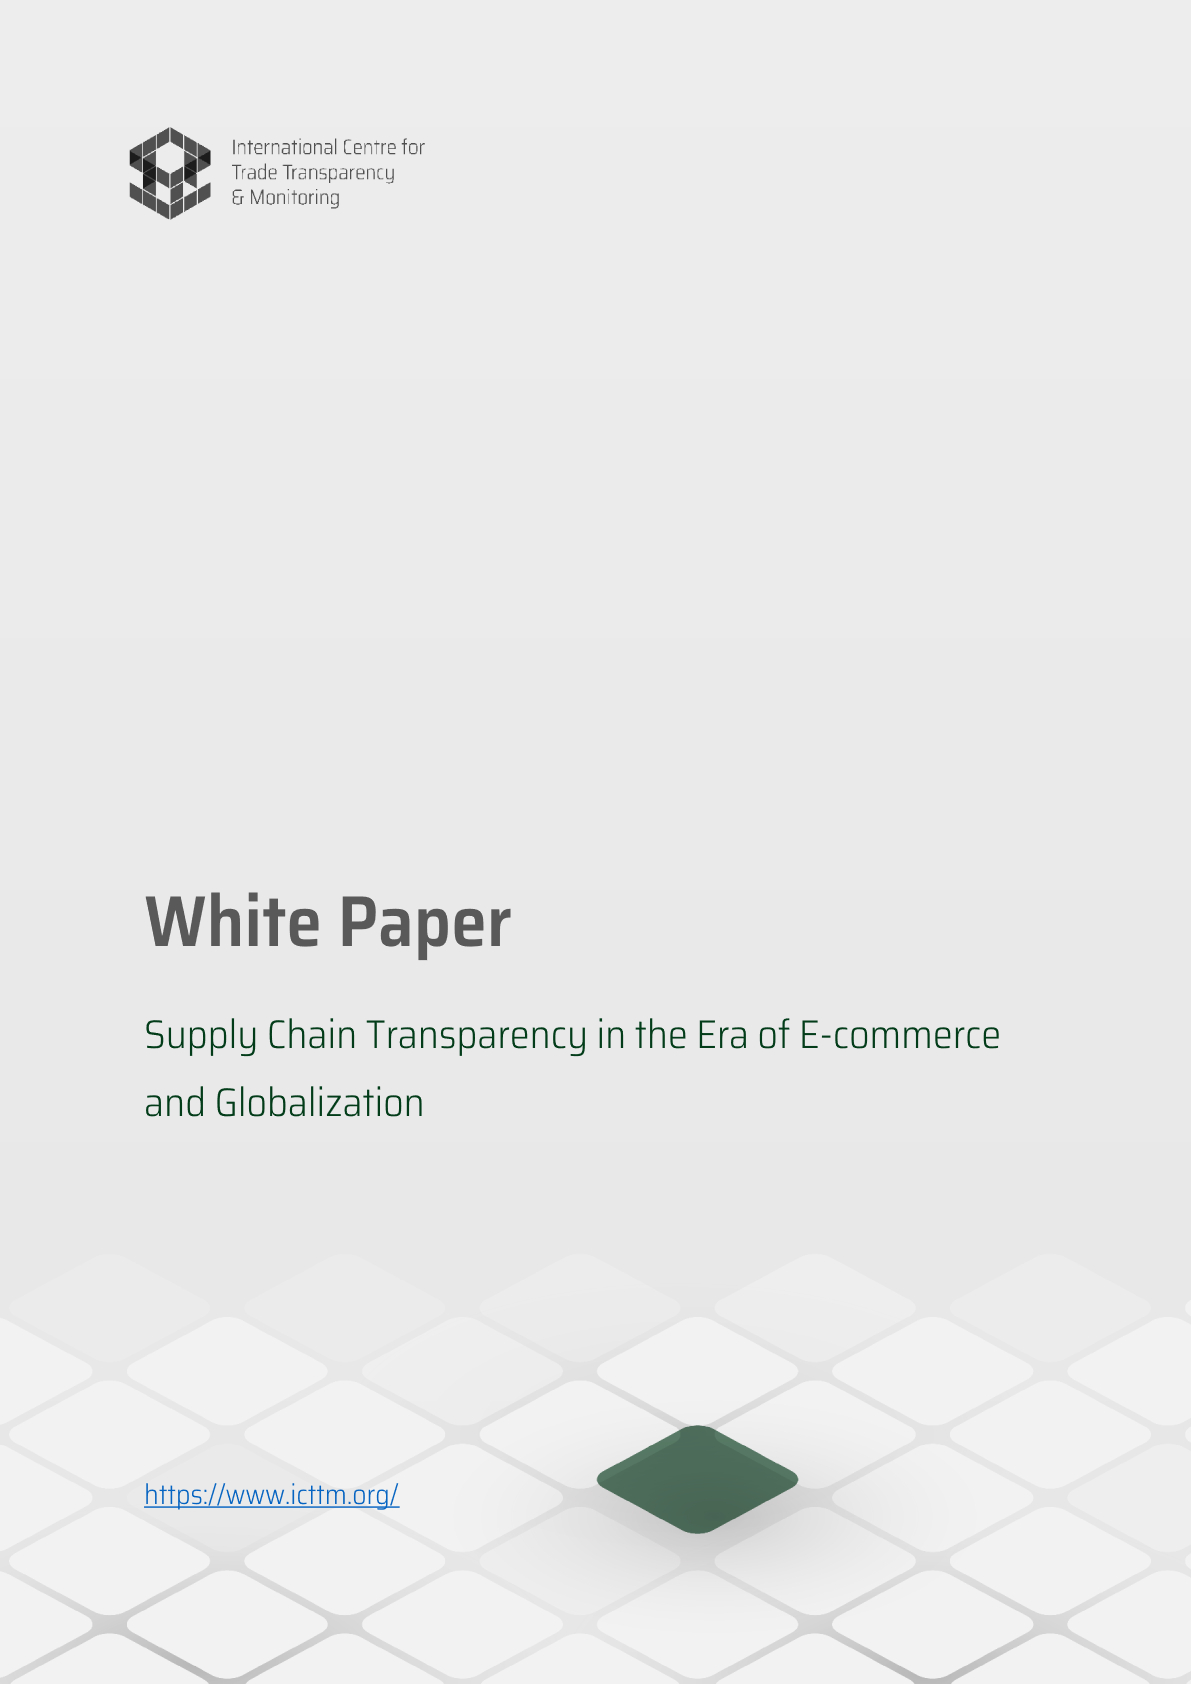 Supply Chain Transparency in the Era of E-commerce and Globalization